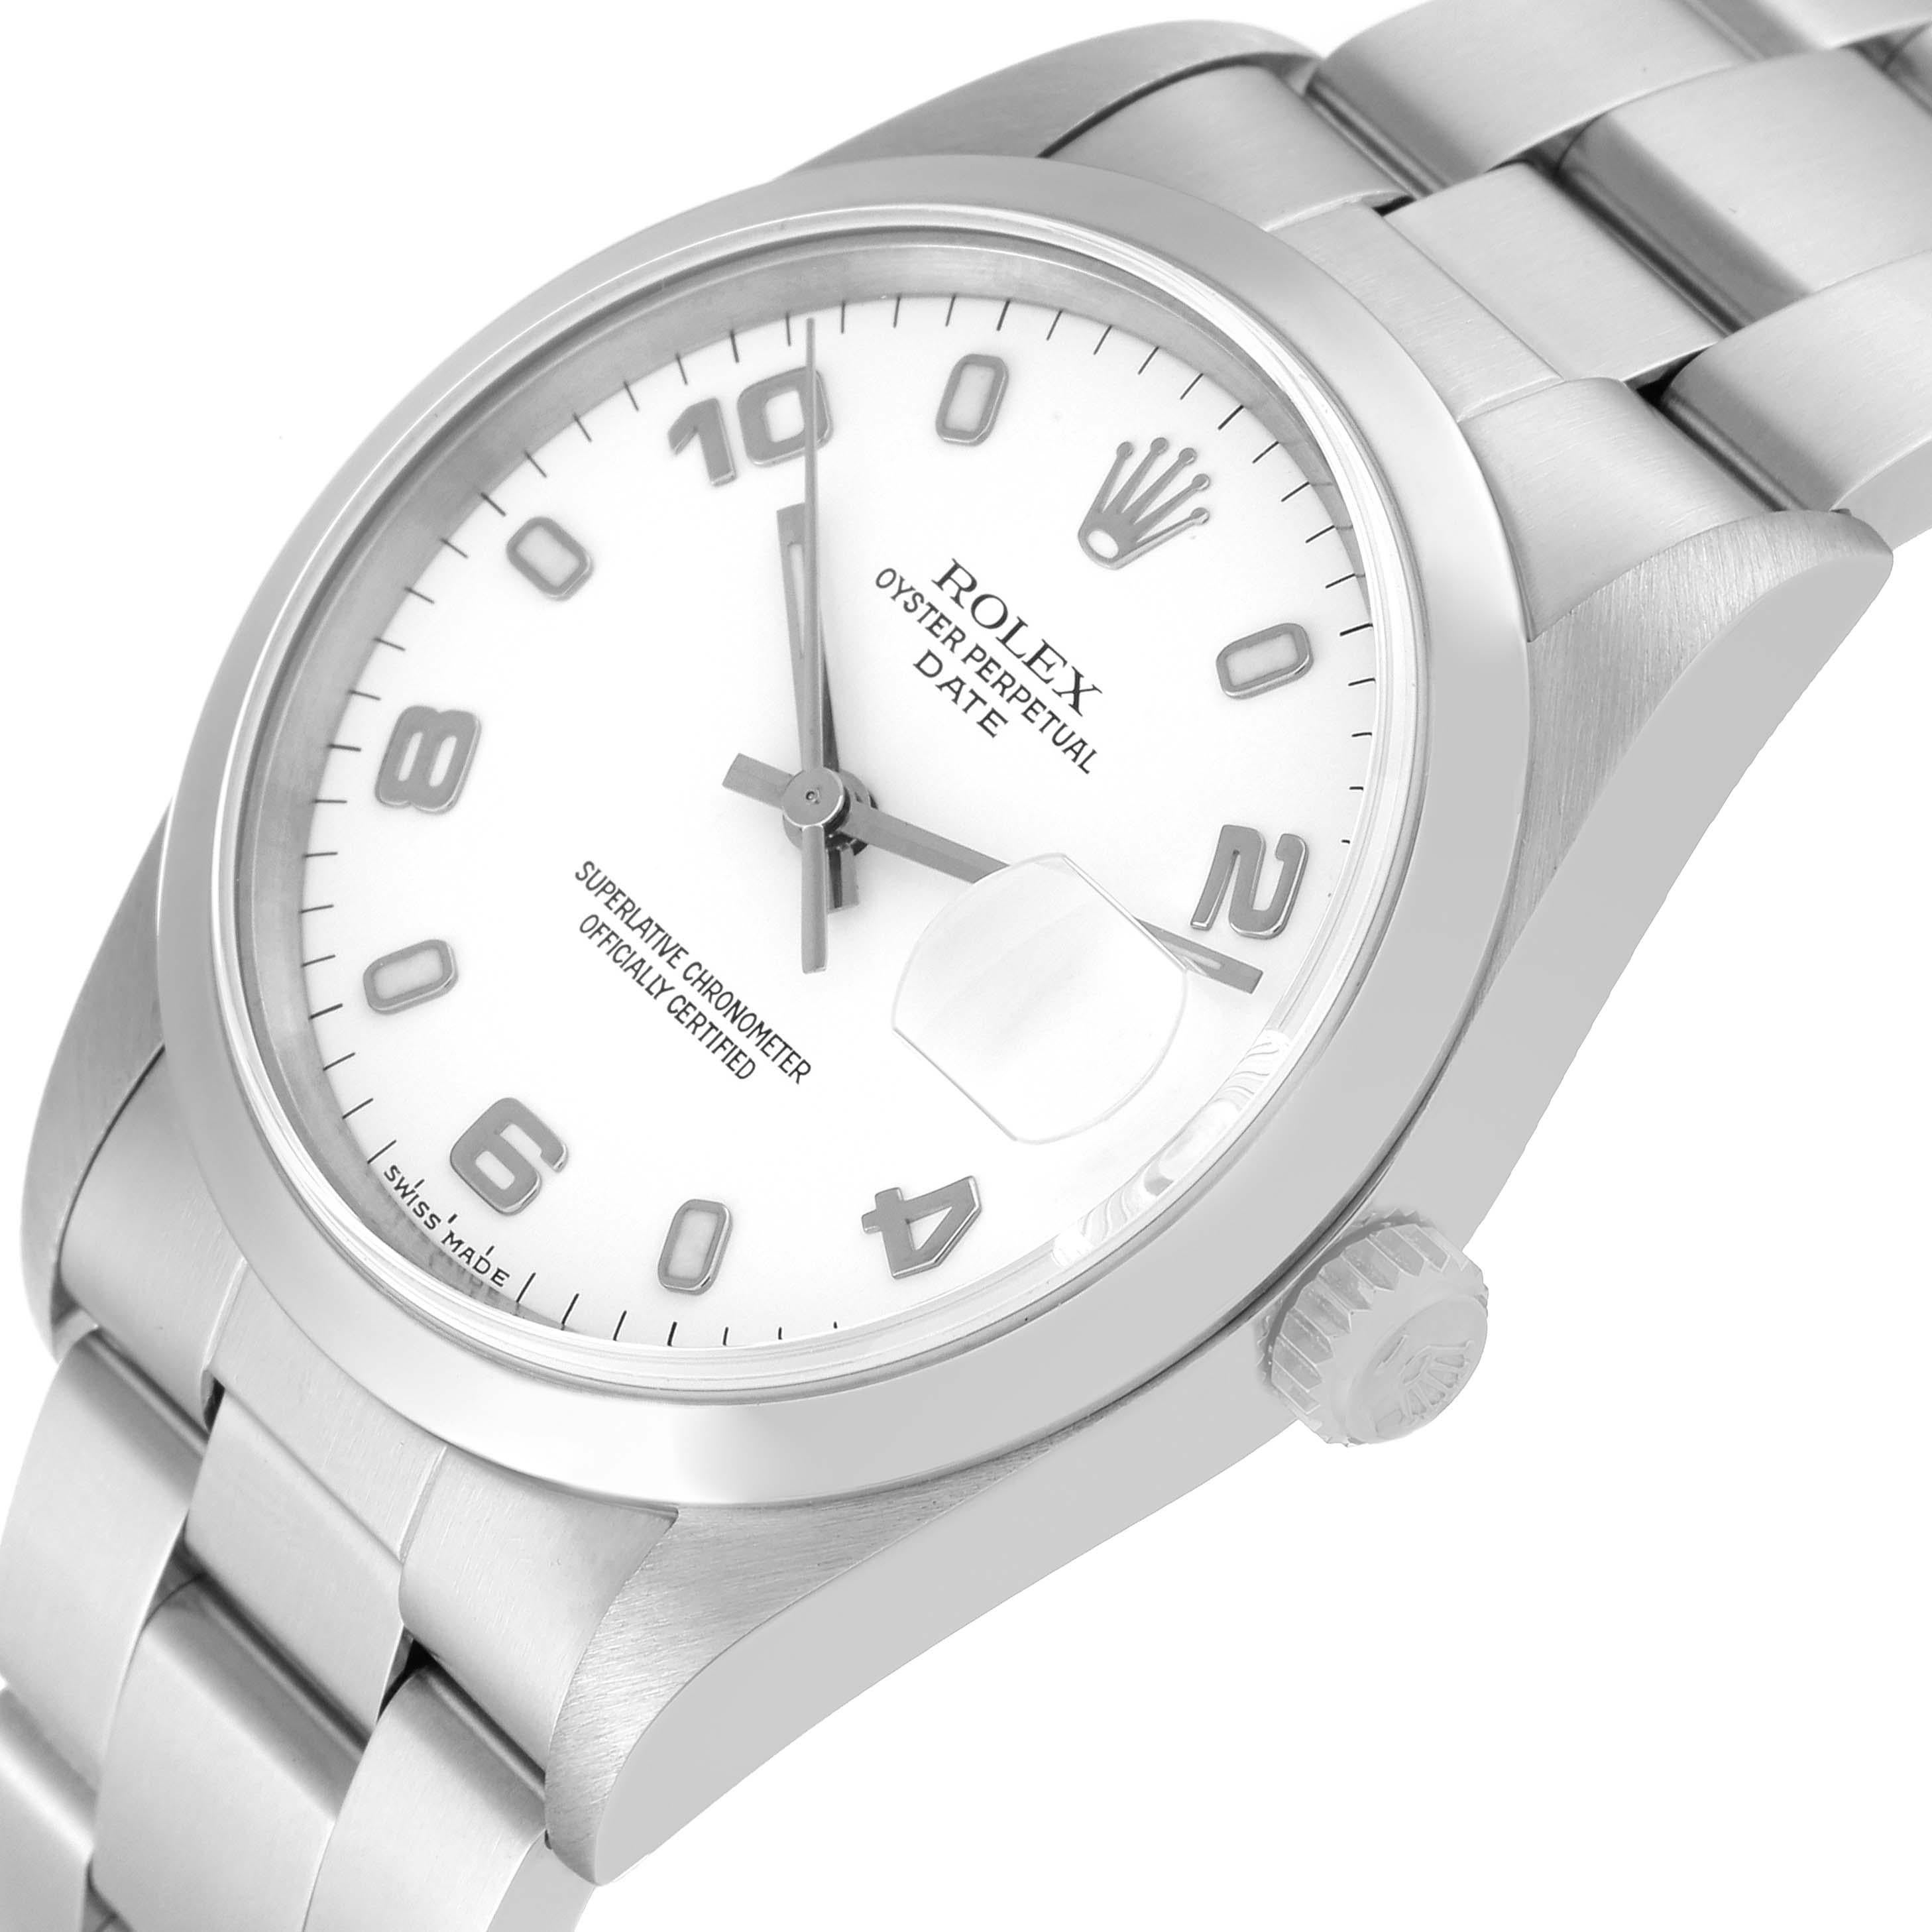 Rolex Date White Dial Oyster Bracelet Steel Mens Watch 15200 Box Papers 1